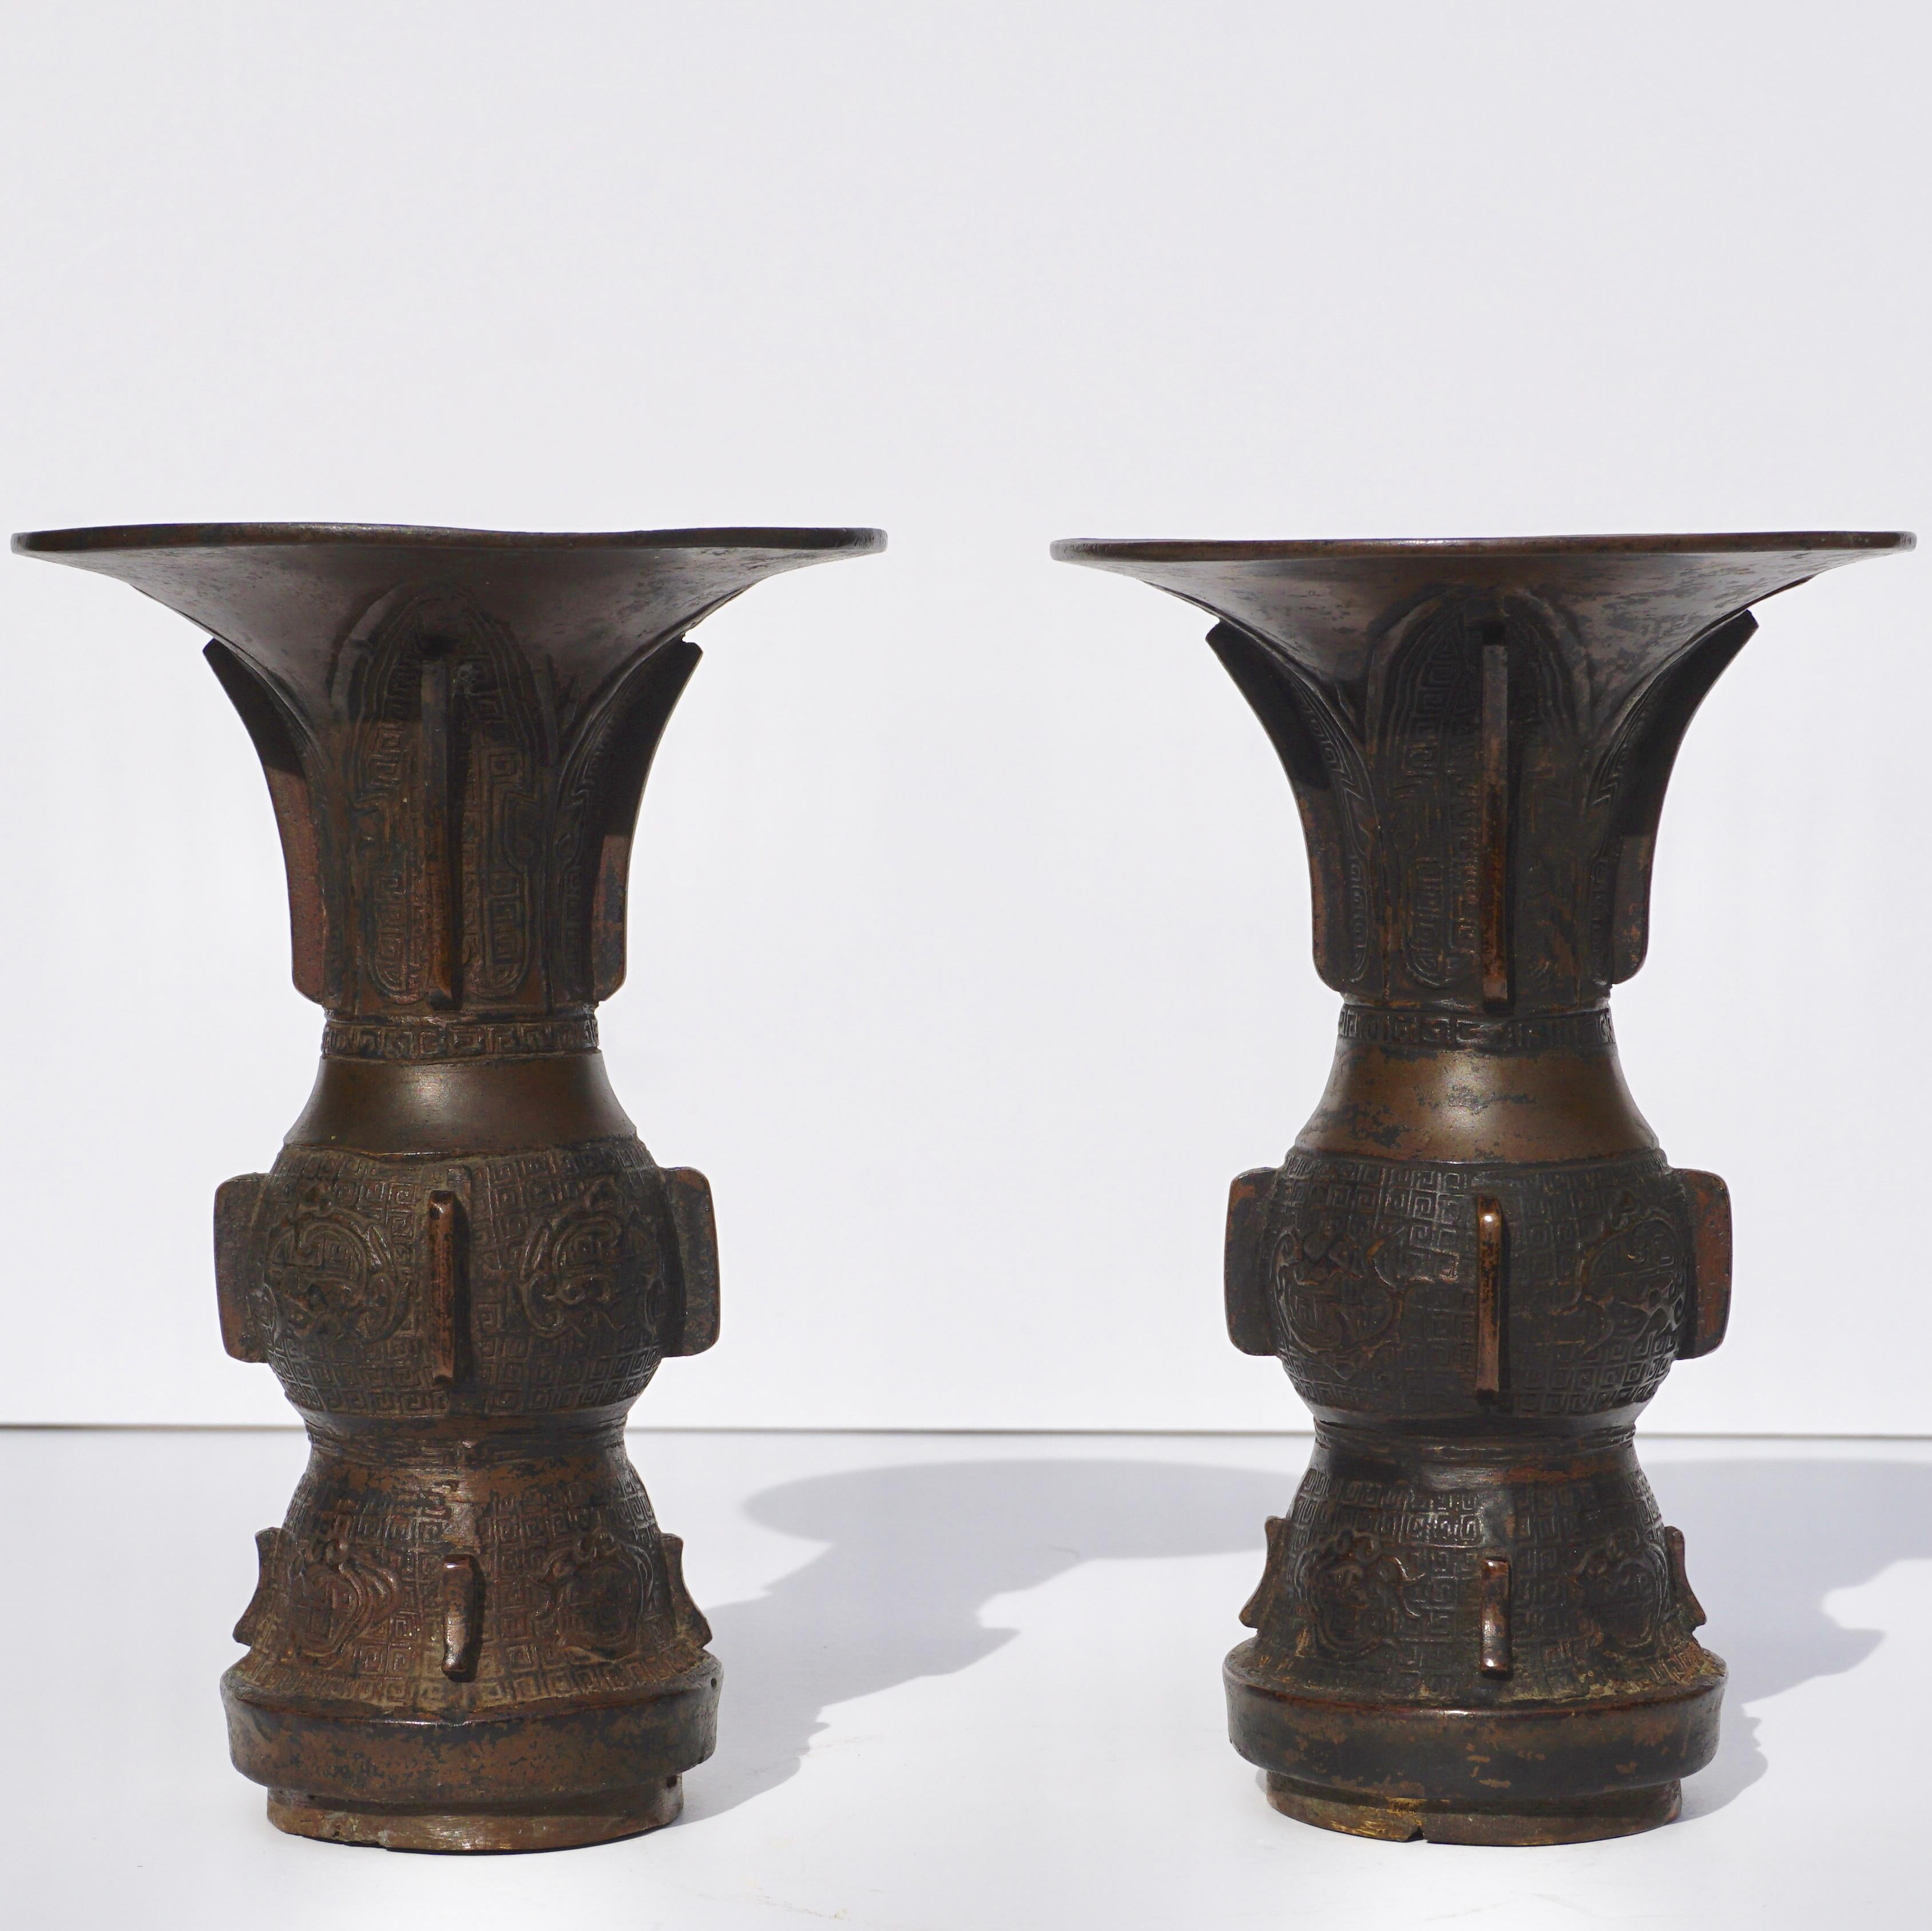 A rare pair of bronze cast archaistic Gu vases with wood bases, 17th century. Late Ming-early Qing dynasty Chinese.

Measures: Height 6.5 inches
Diameter 4 inches

Condition: Wear commensurate of age and use.